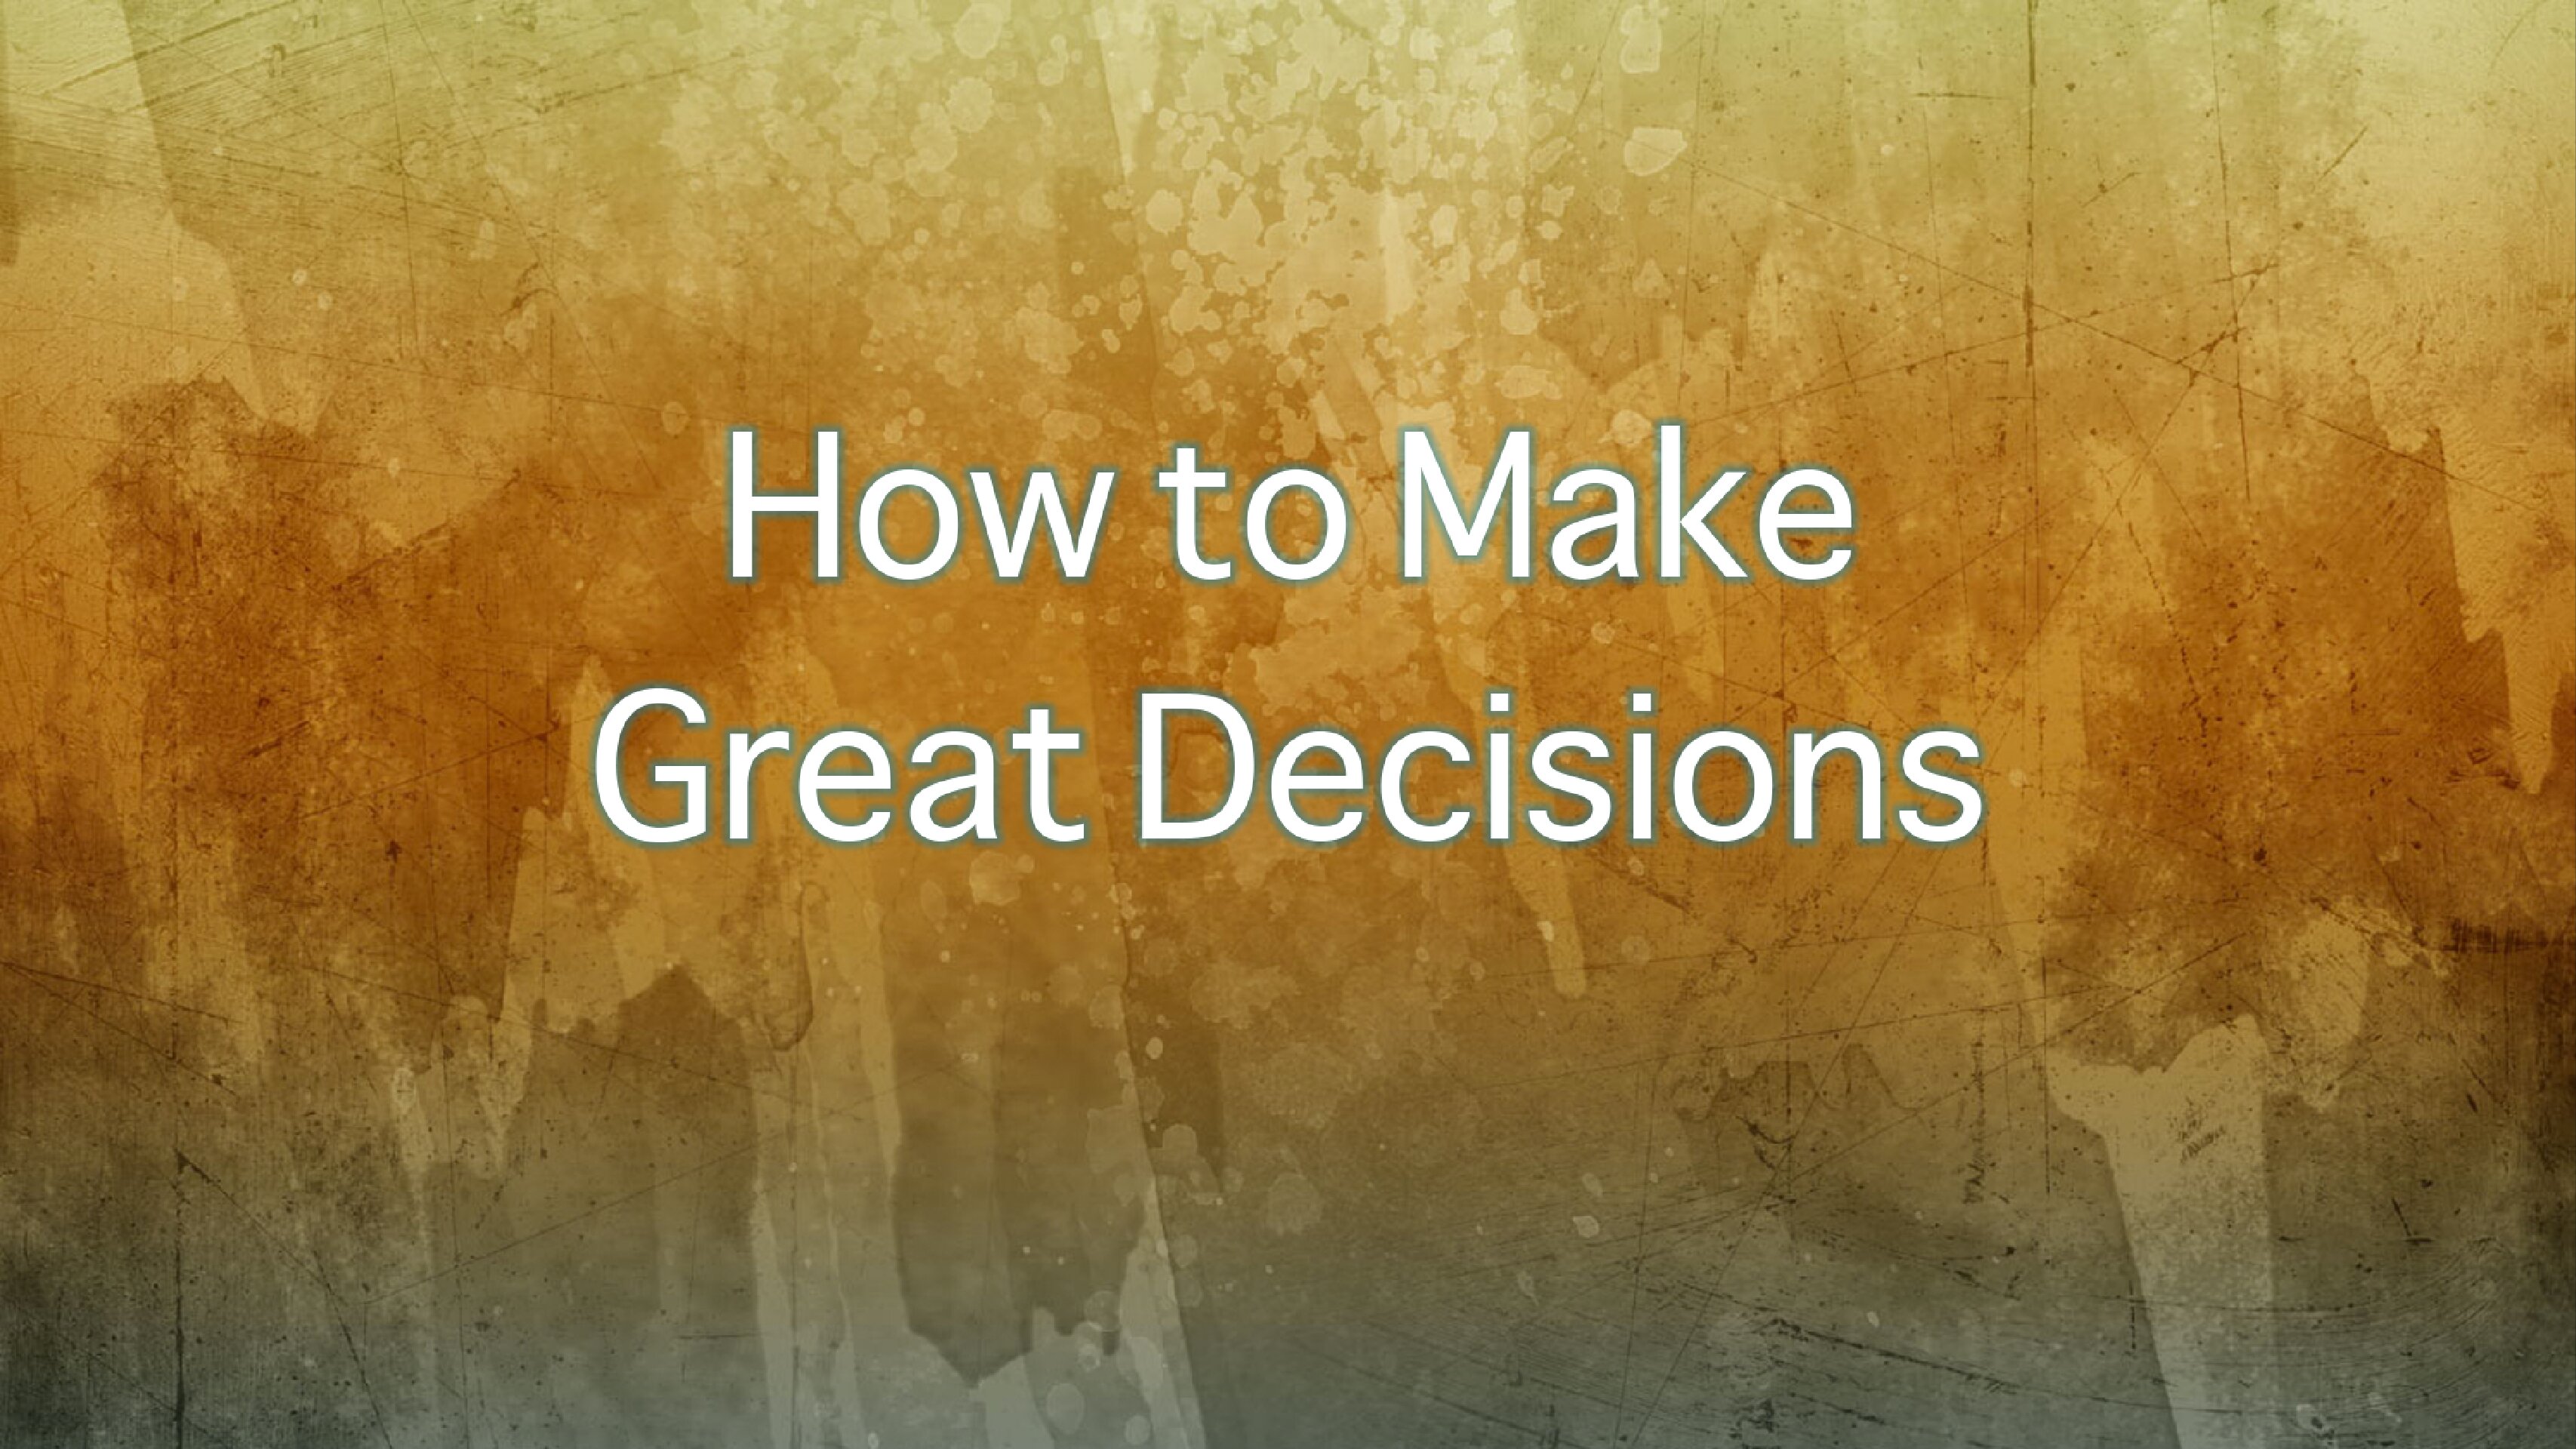 How to Make Great Decisions